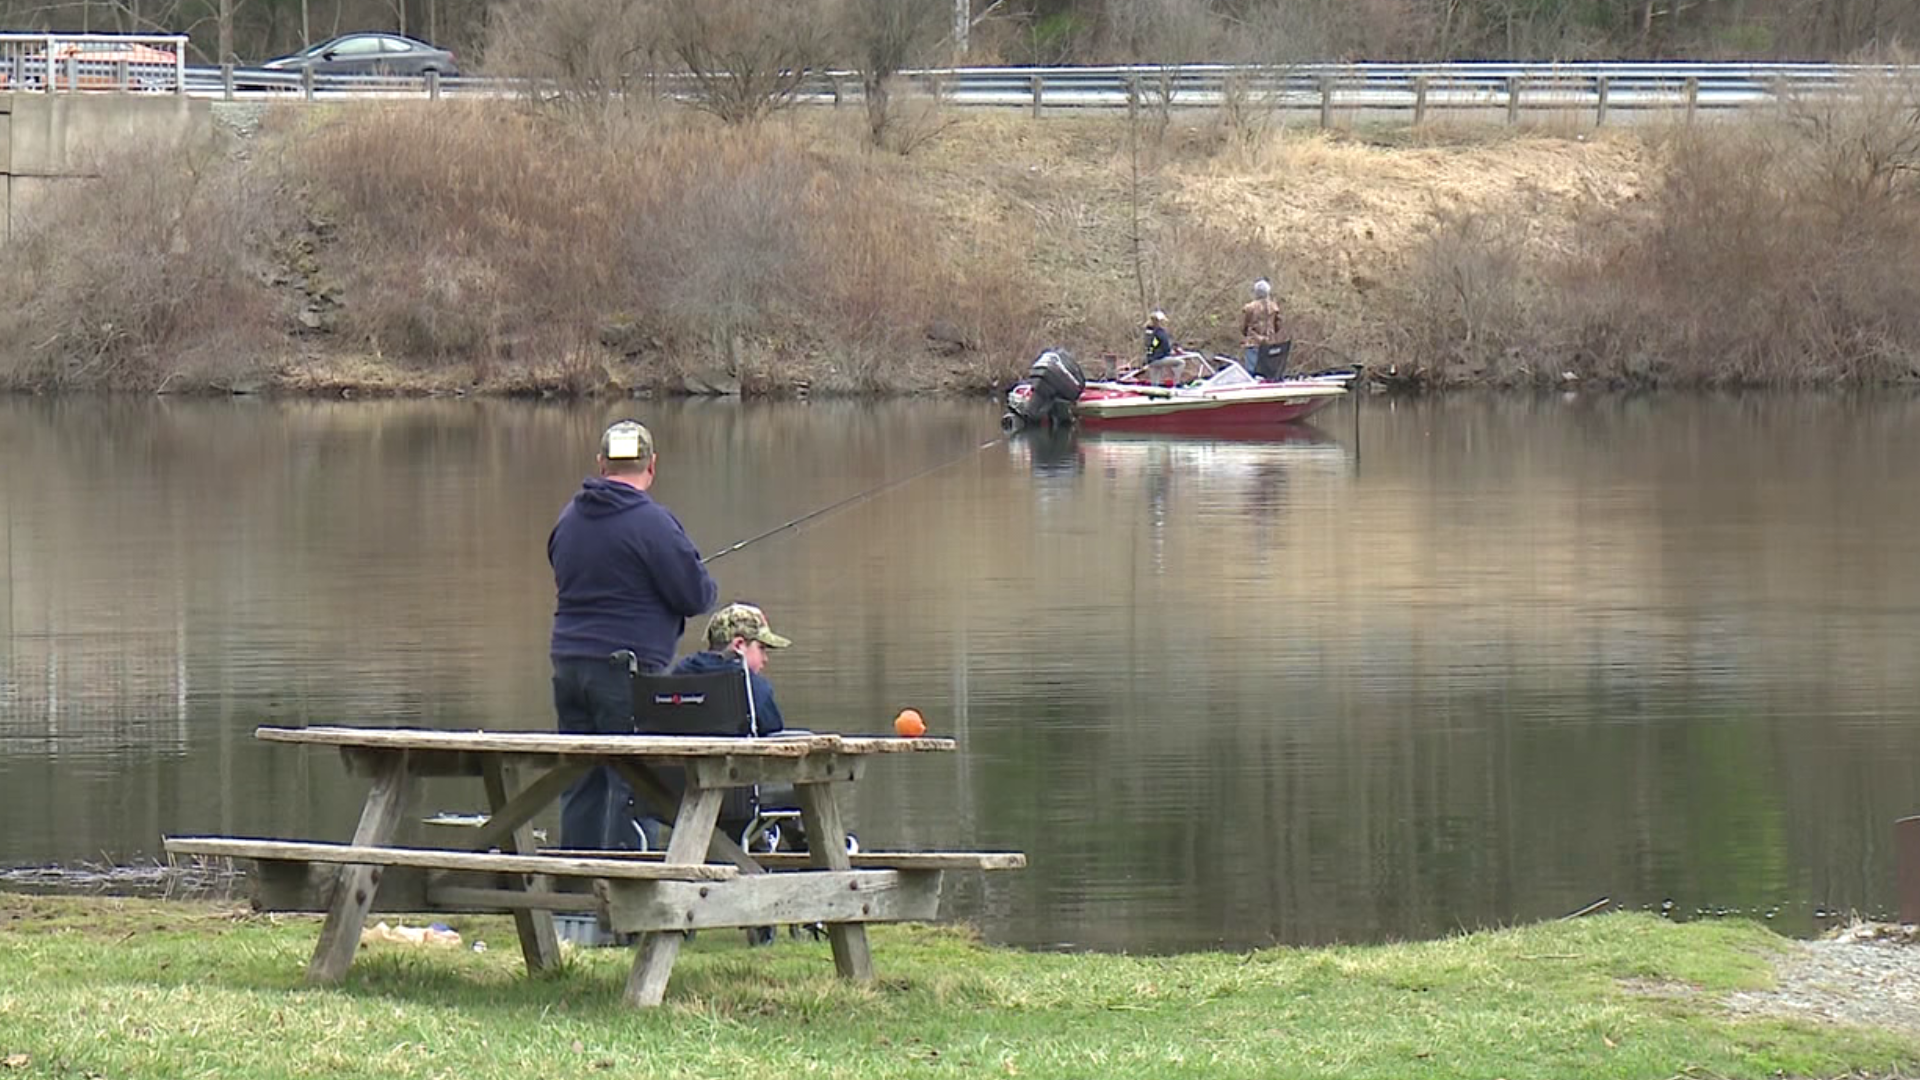 Youth fishing day kicks off with perfect weather